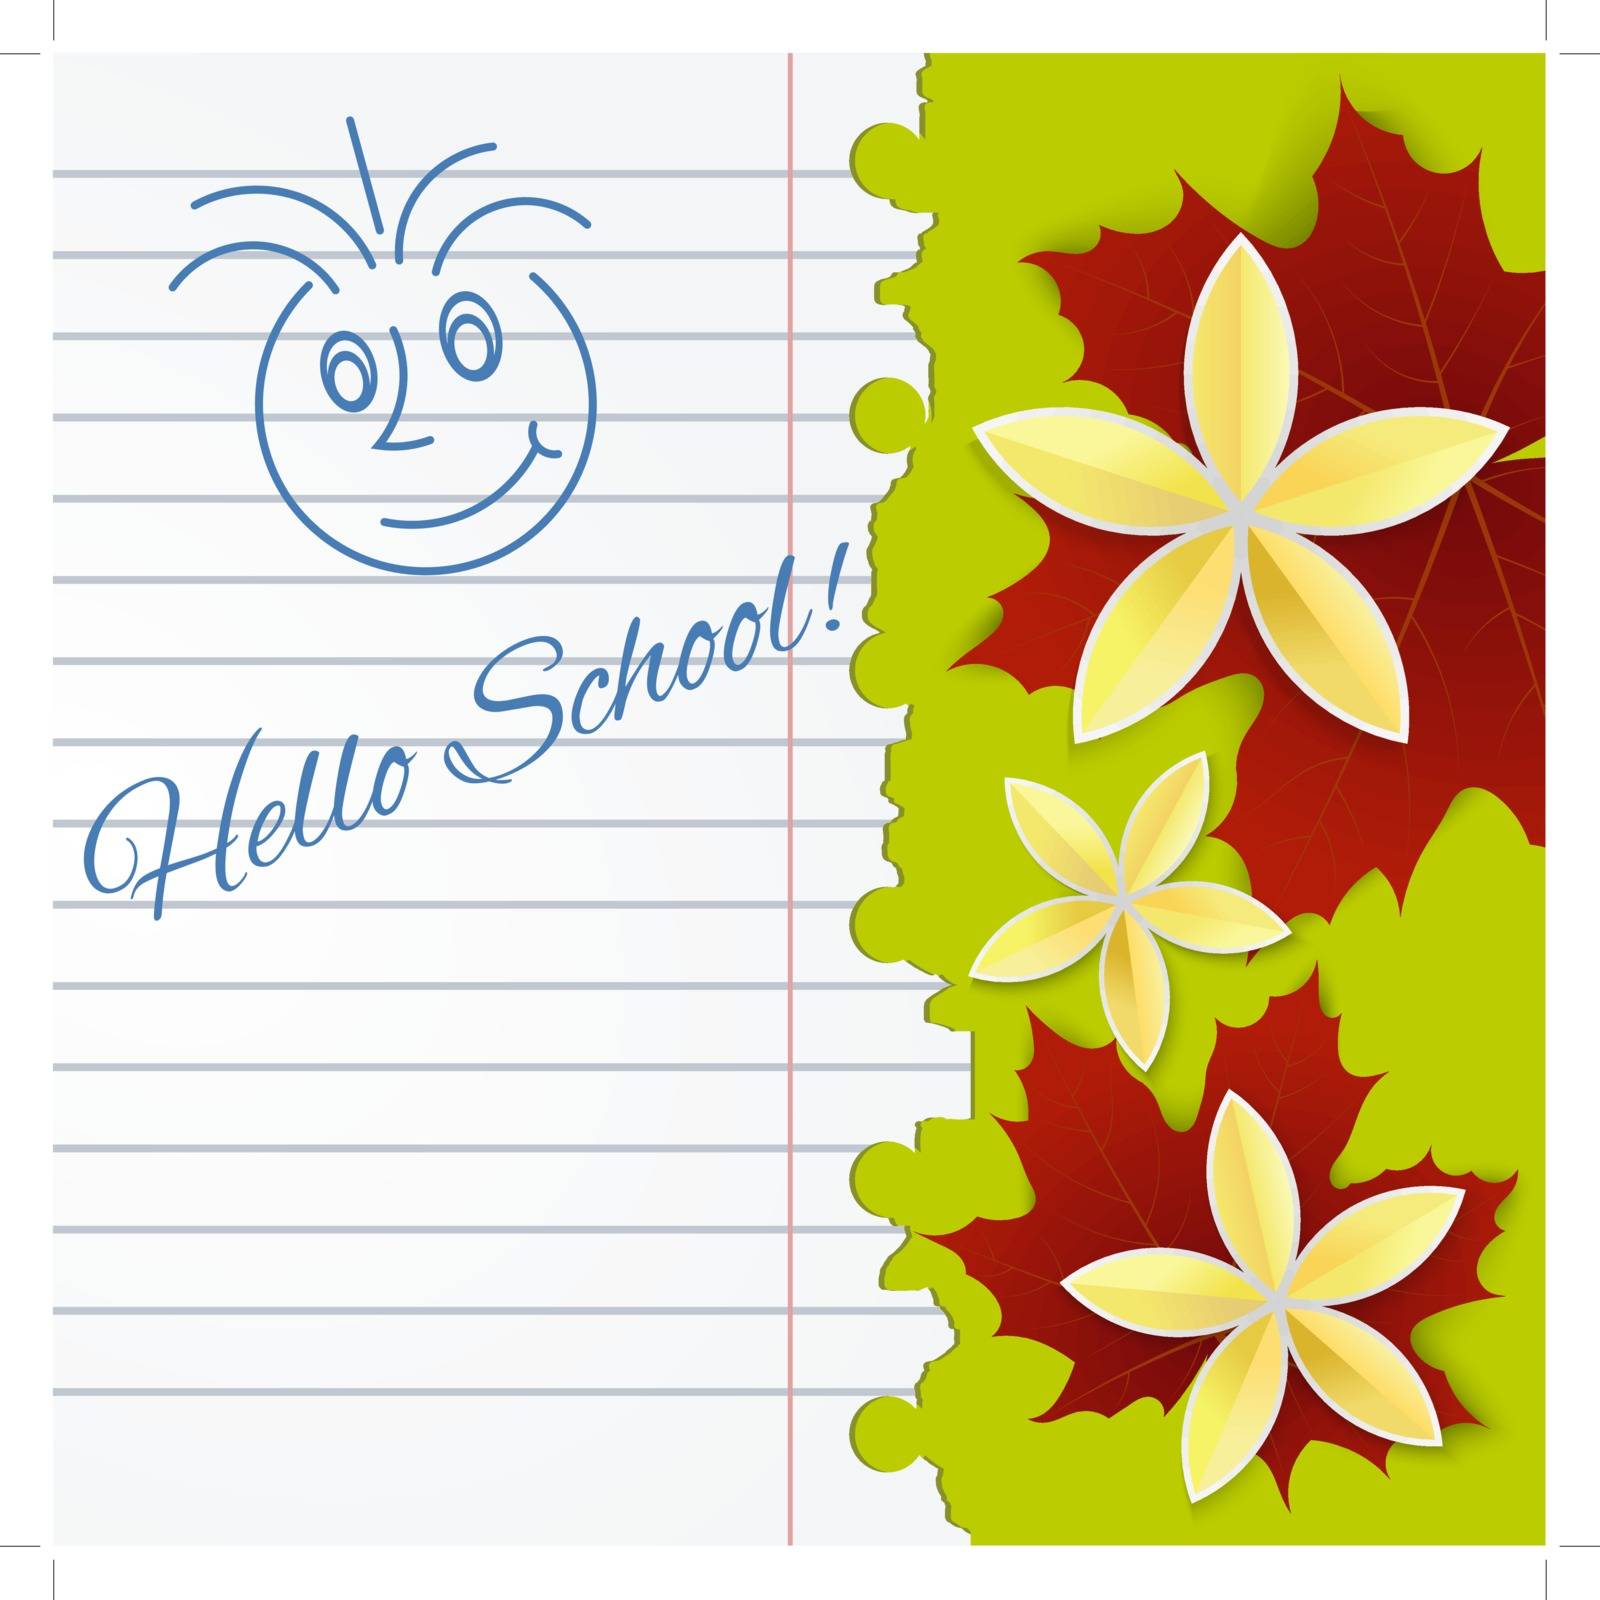 Sheet of school notebook with flowers and 
leaves of maple